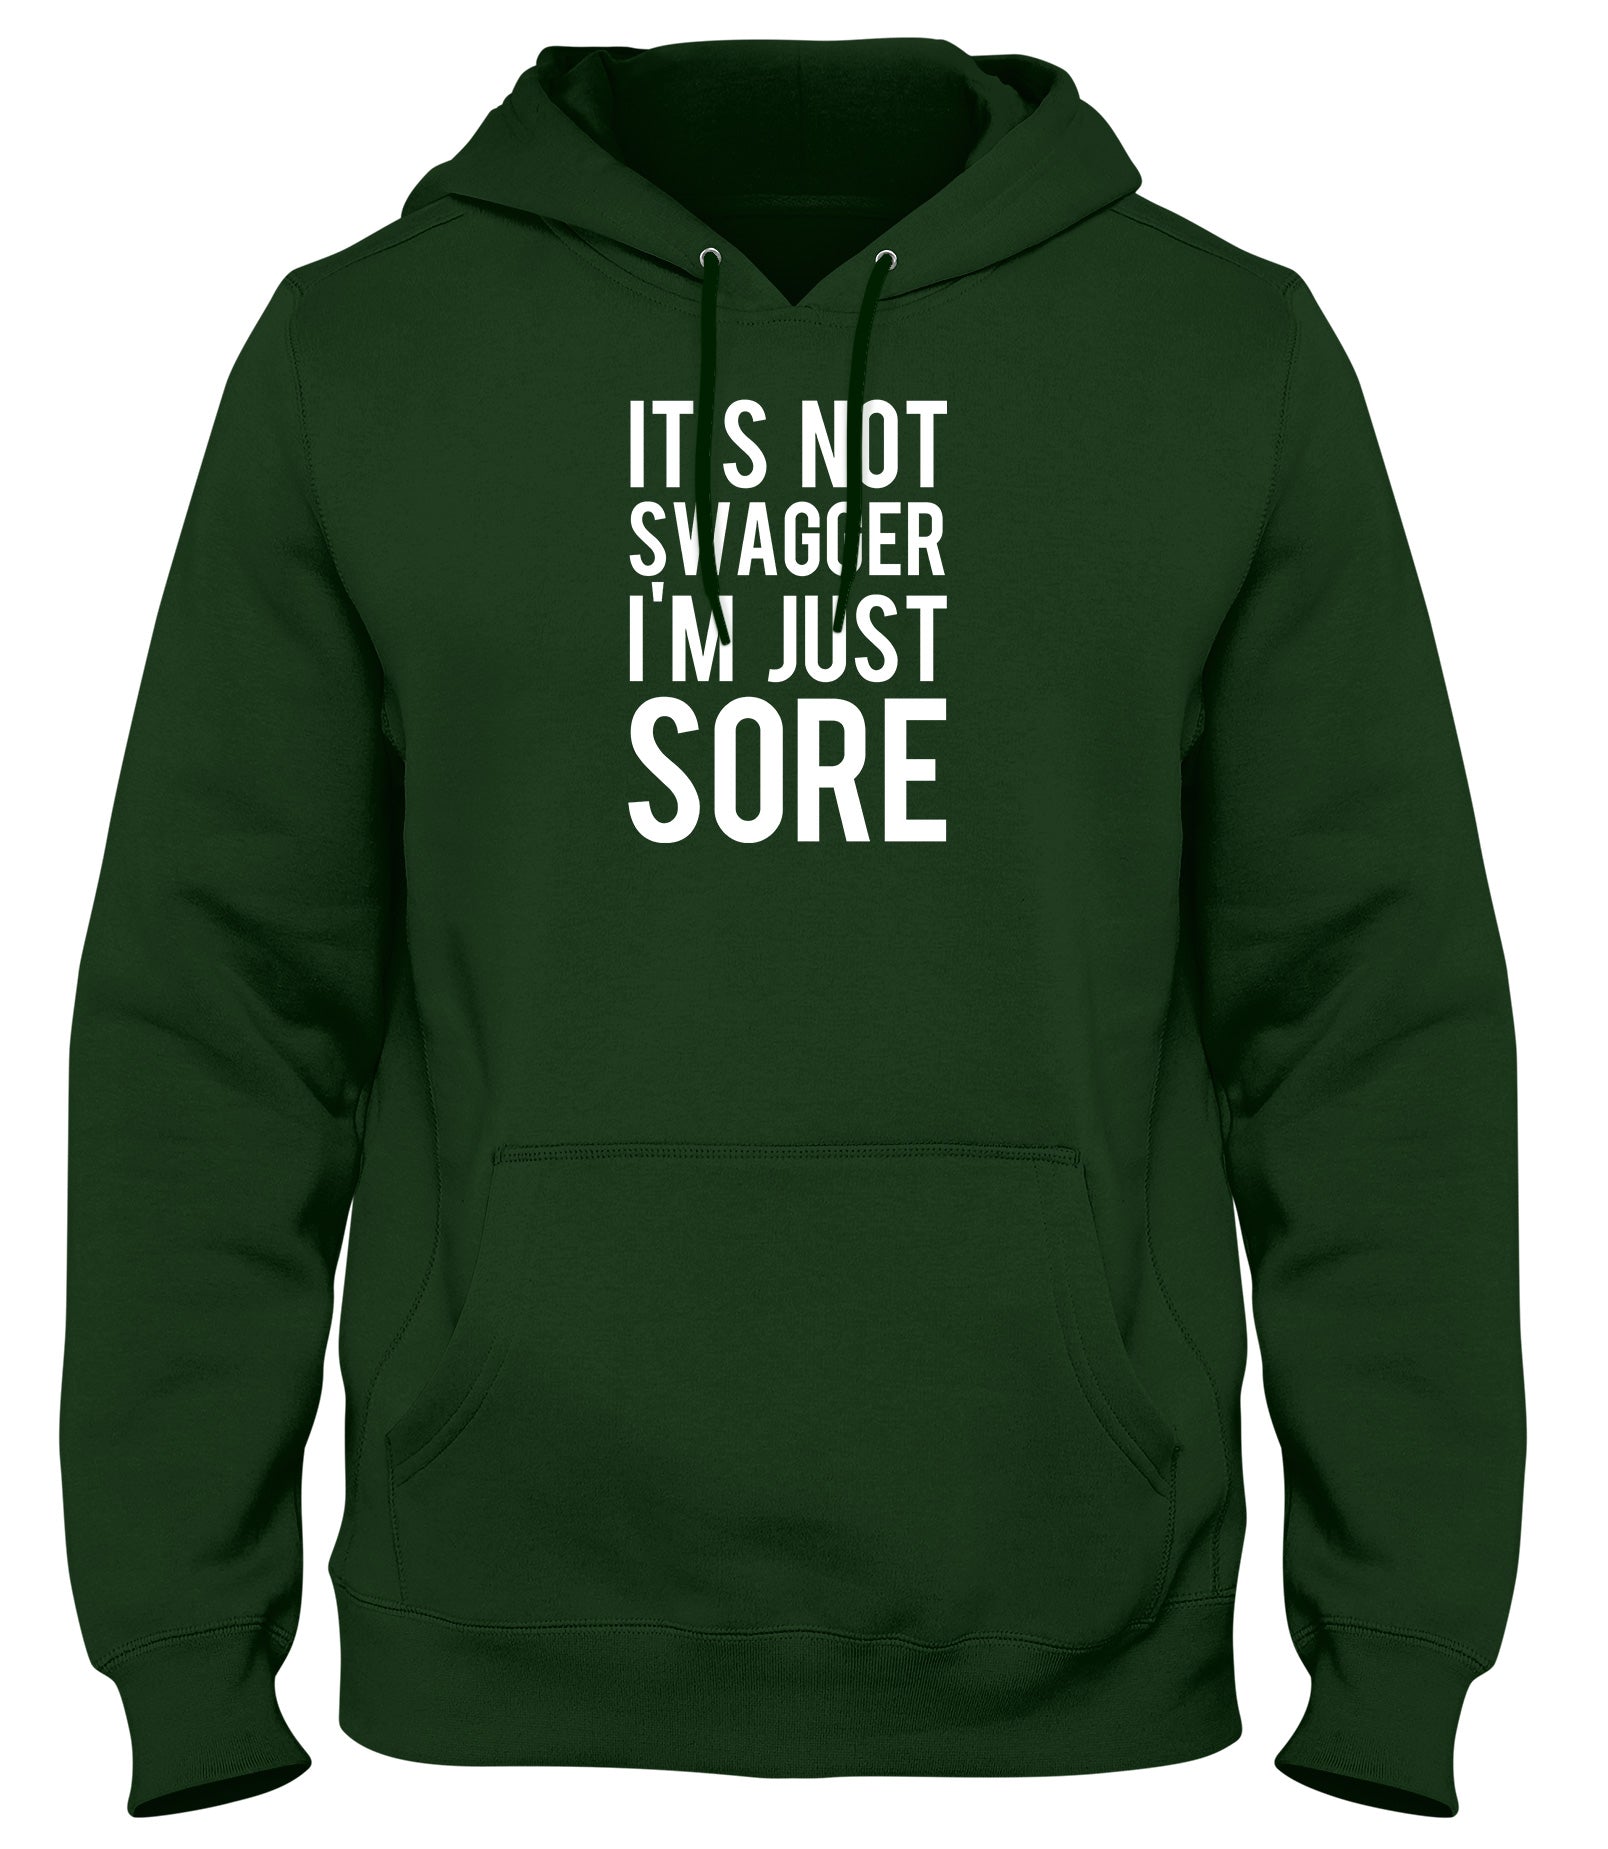 IT'S NOT SWAGGER I'M JUST SORE WOMENS LADIES MENS UNISEX HOODIE